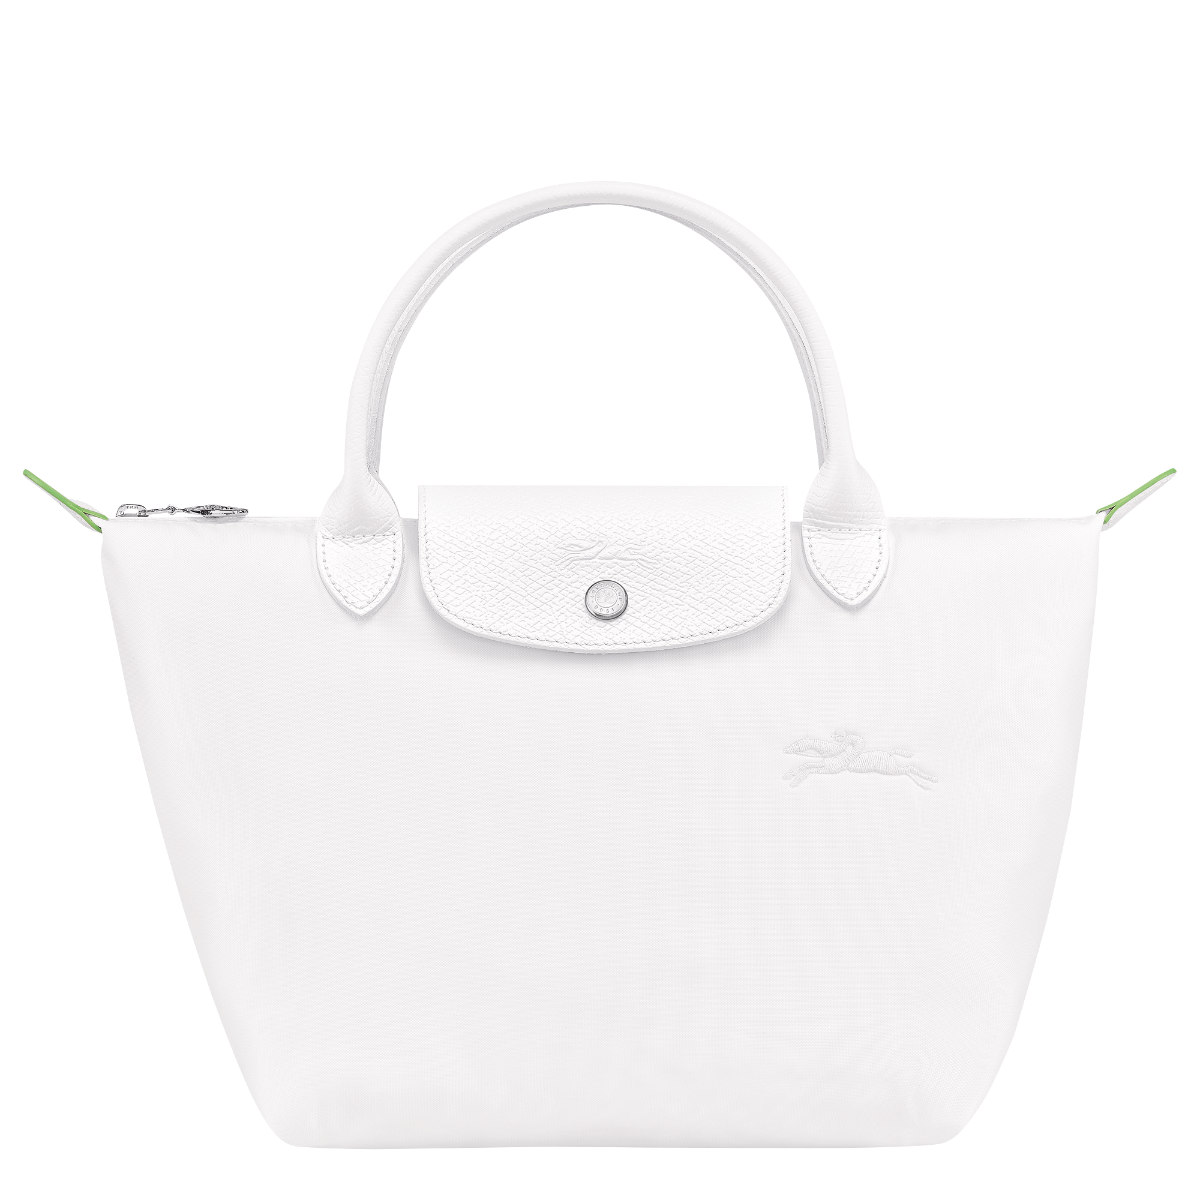 Longchamp Le Pliage is the one bag I will always recommend and keep on  buying as a laptop bag. And with the smaller footprint of 13” laptops now,  it can already fit